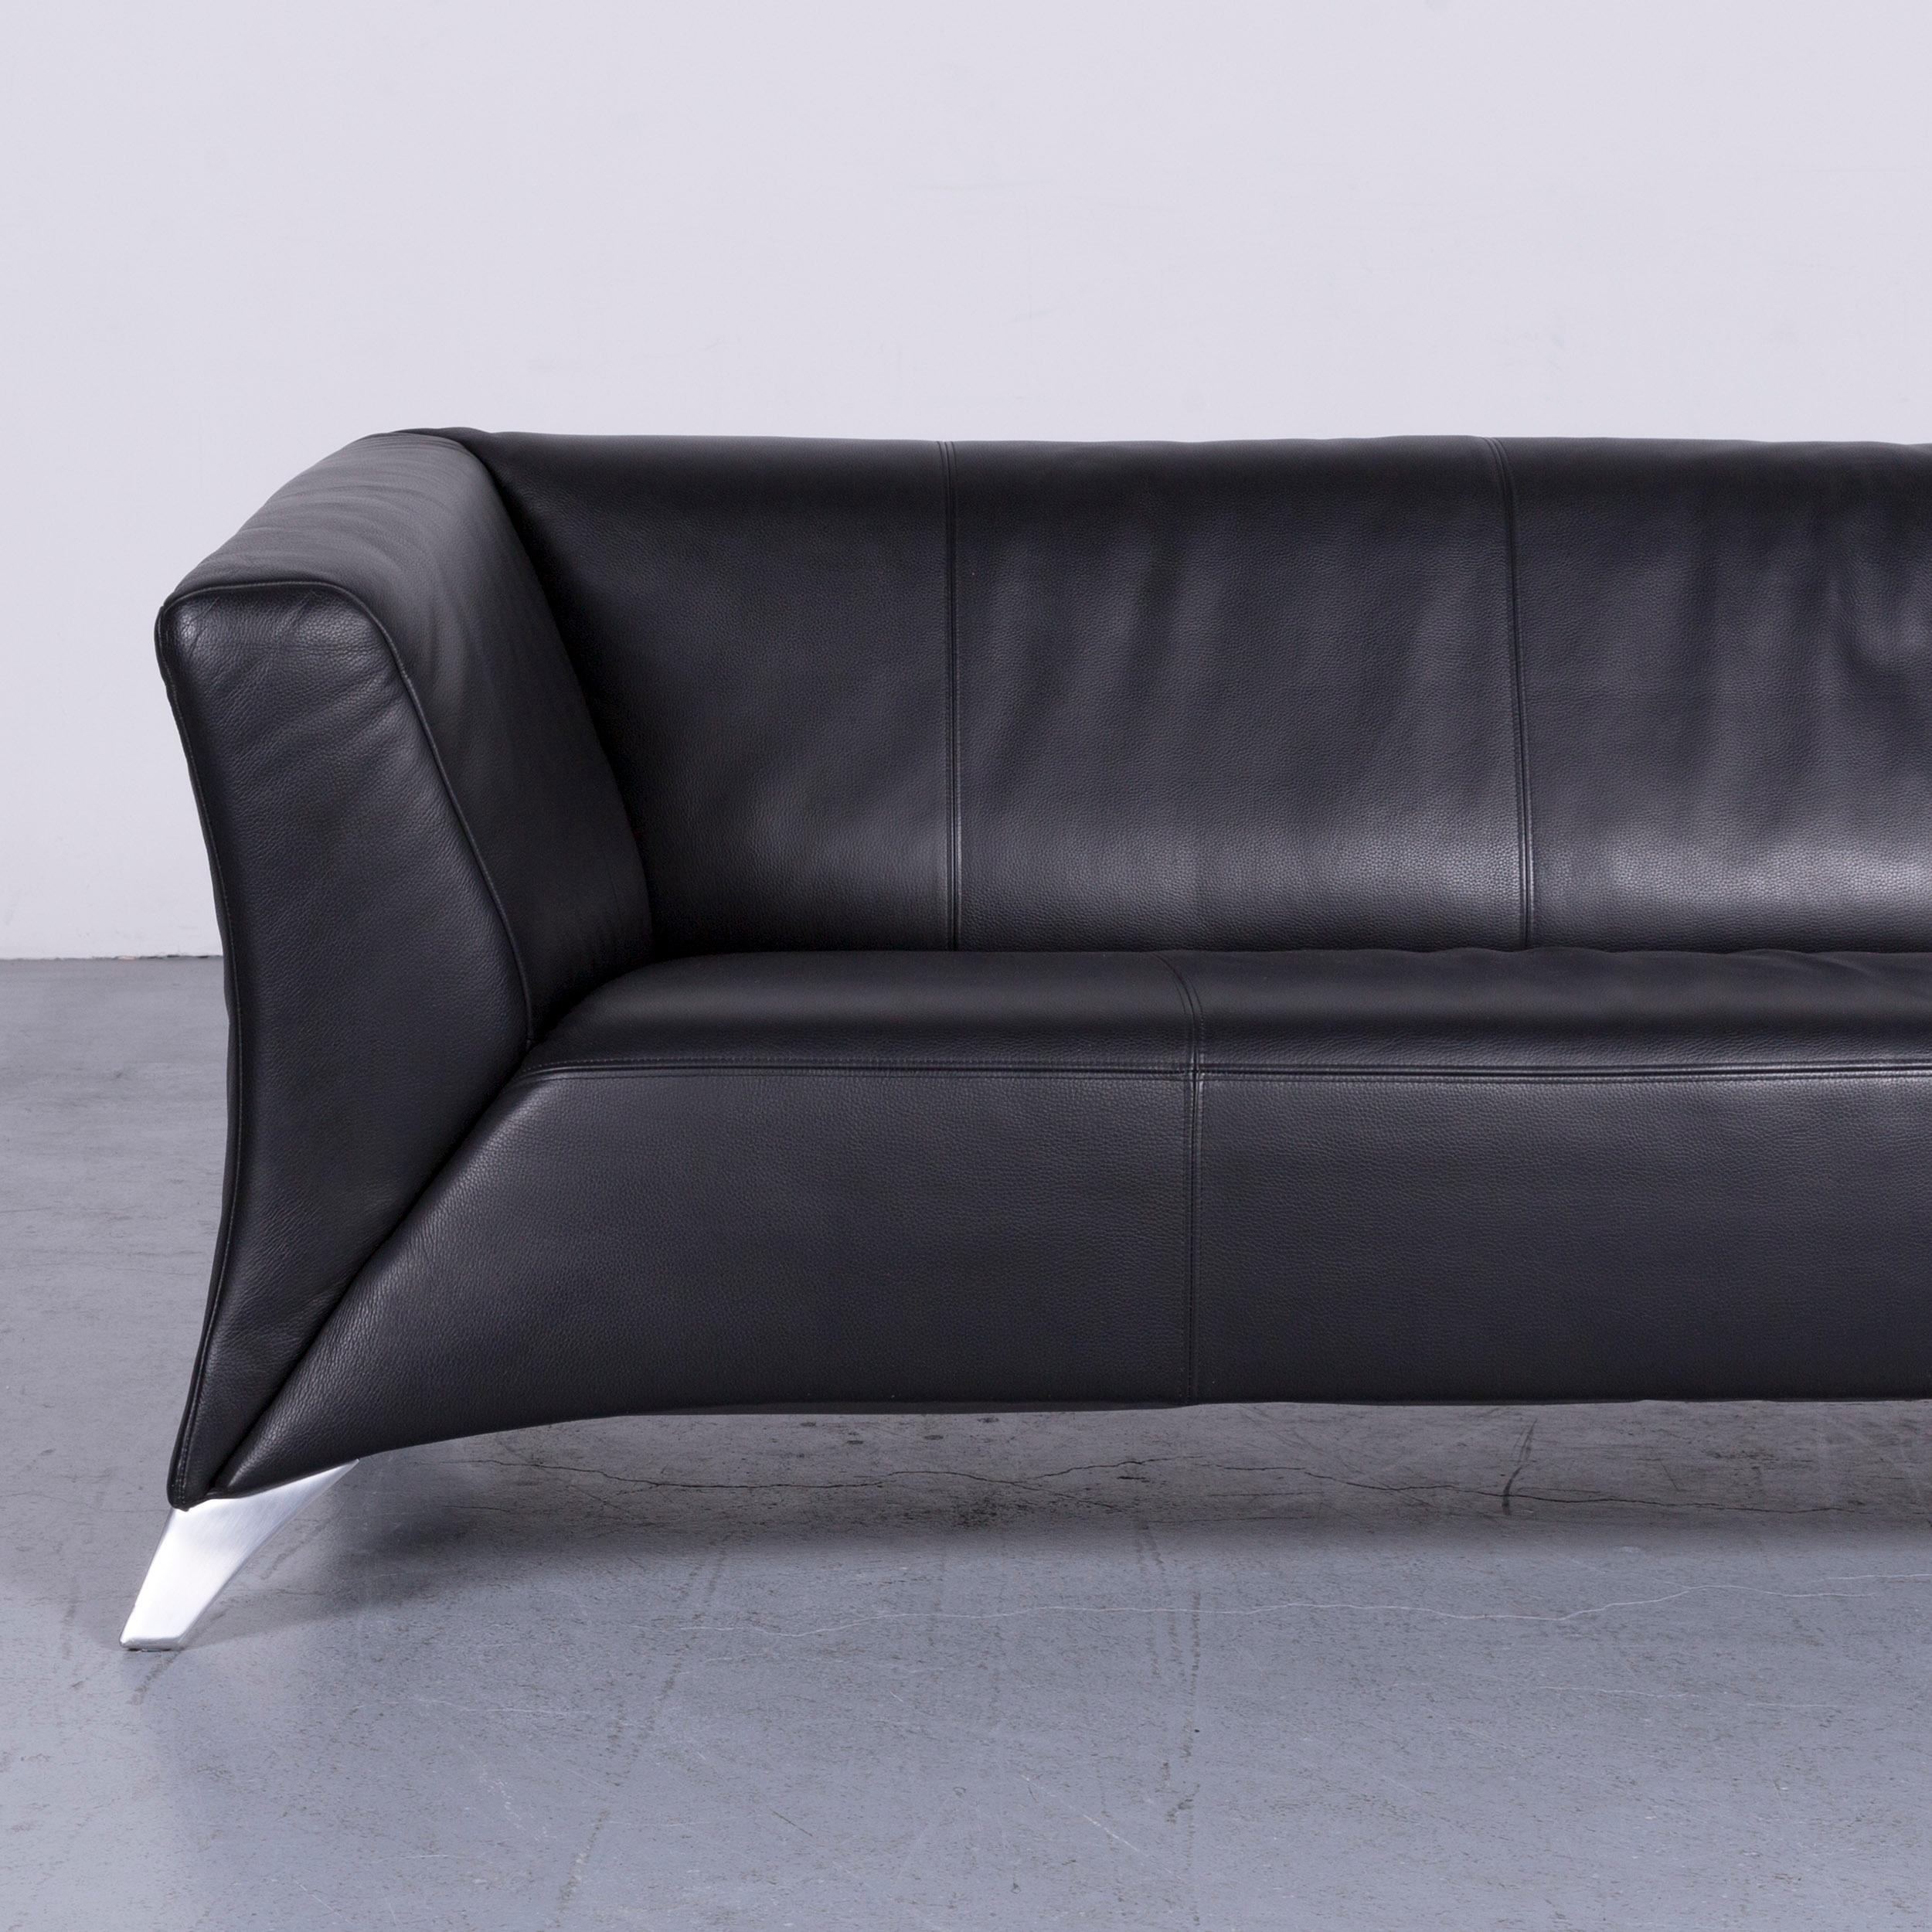 German Rolf Benz 322 Designer Sofa Black Two-Seat Leather Modern Couch For Sale